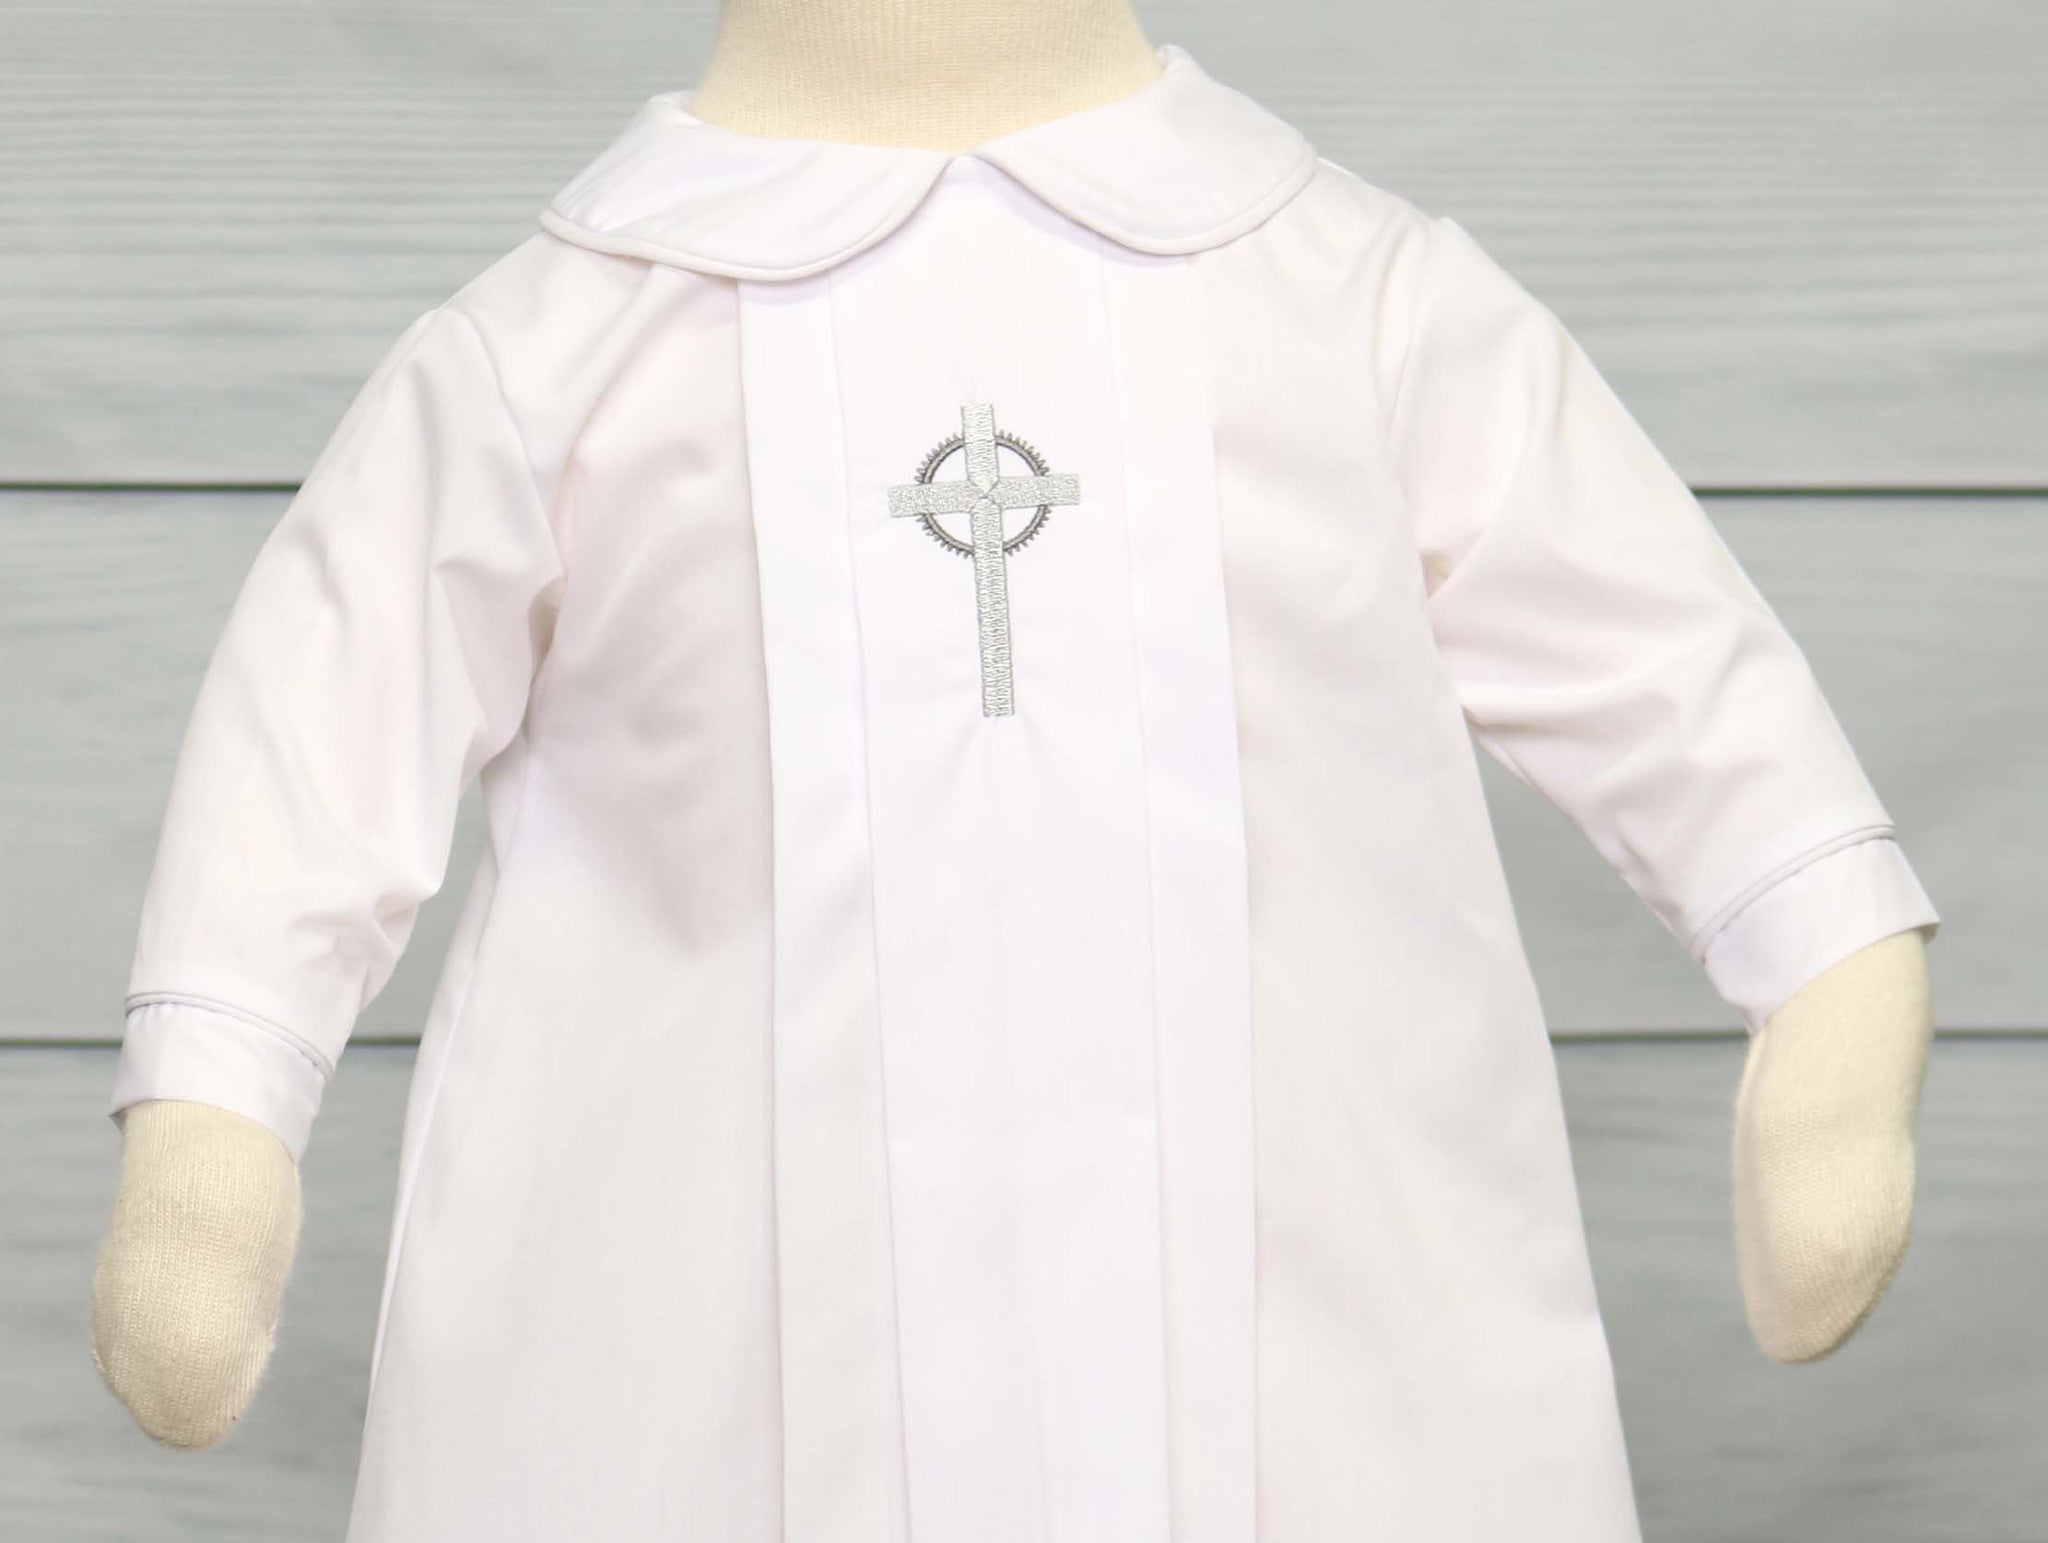 boy baptism outfits